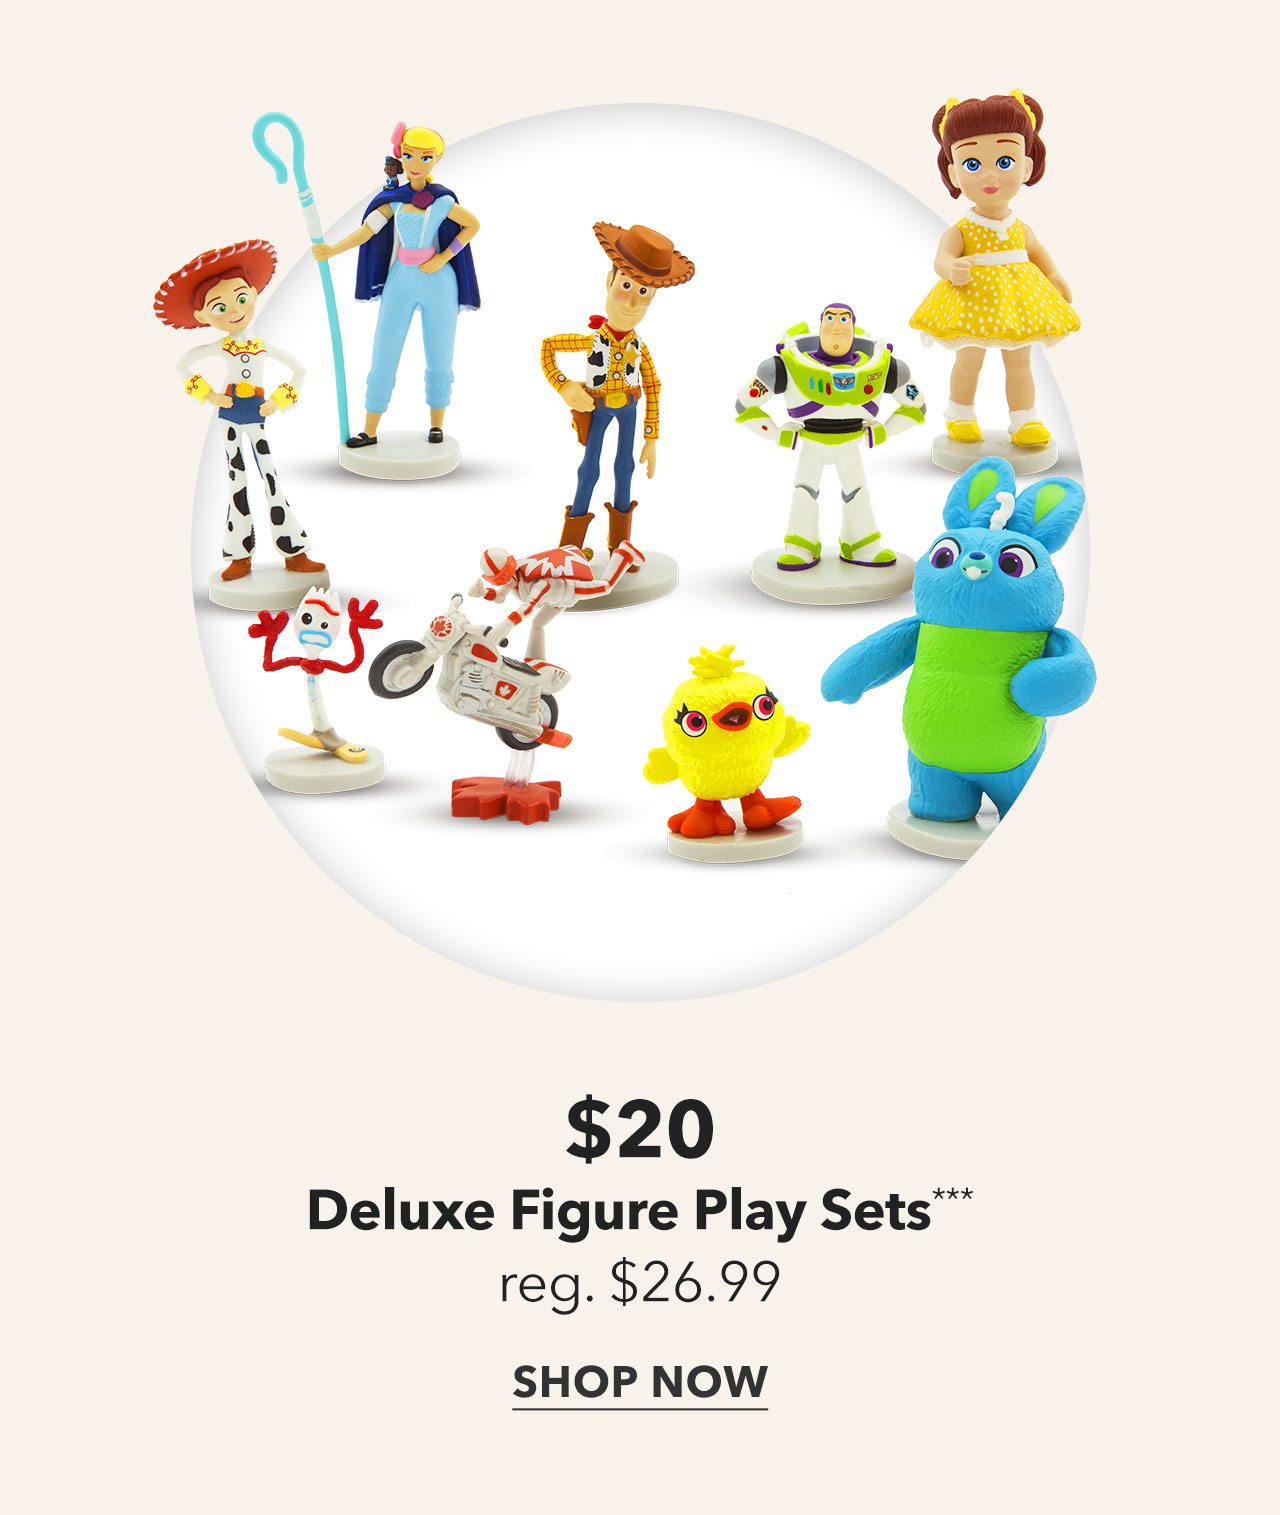 Deluxe Figure Play Sets | Shop Now